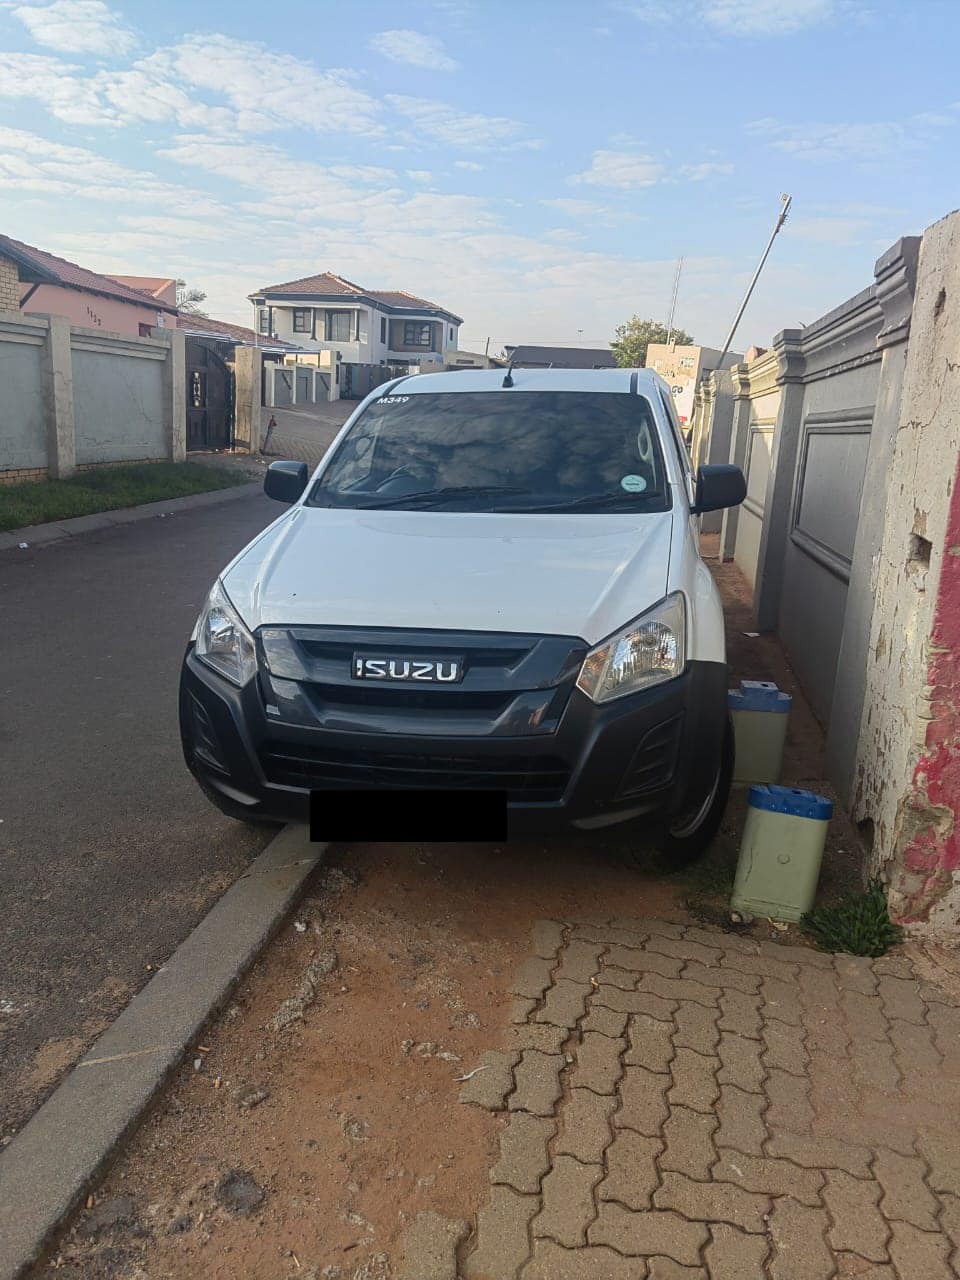 Stolen branded vehicle recovered in Daveyton